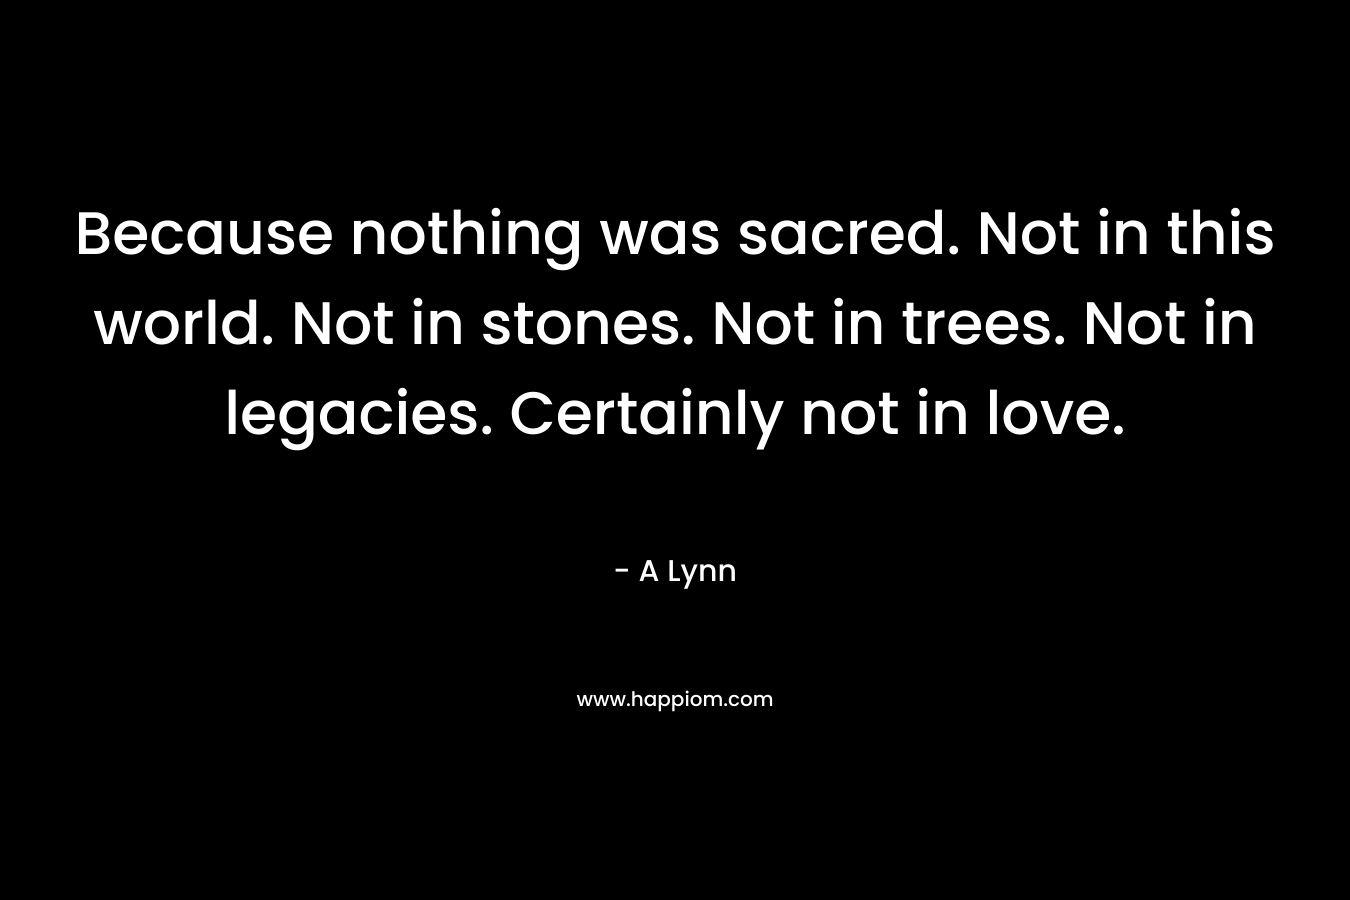 Because nothing was sacred. Not in this world. Not in stones. Not in trees. Not in legacies. Certainly not in love. – A Lynn